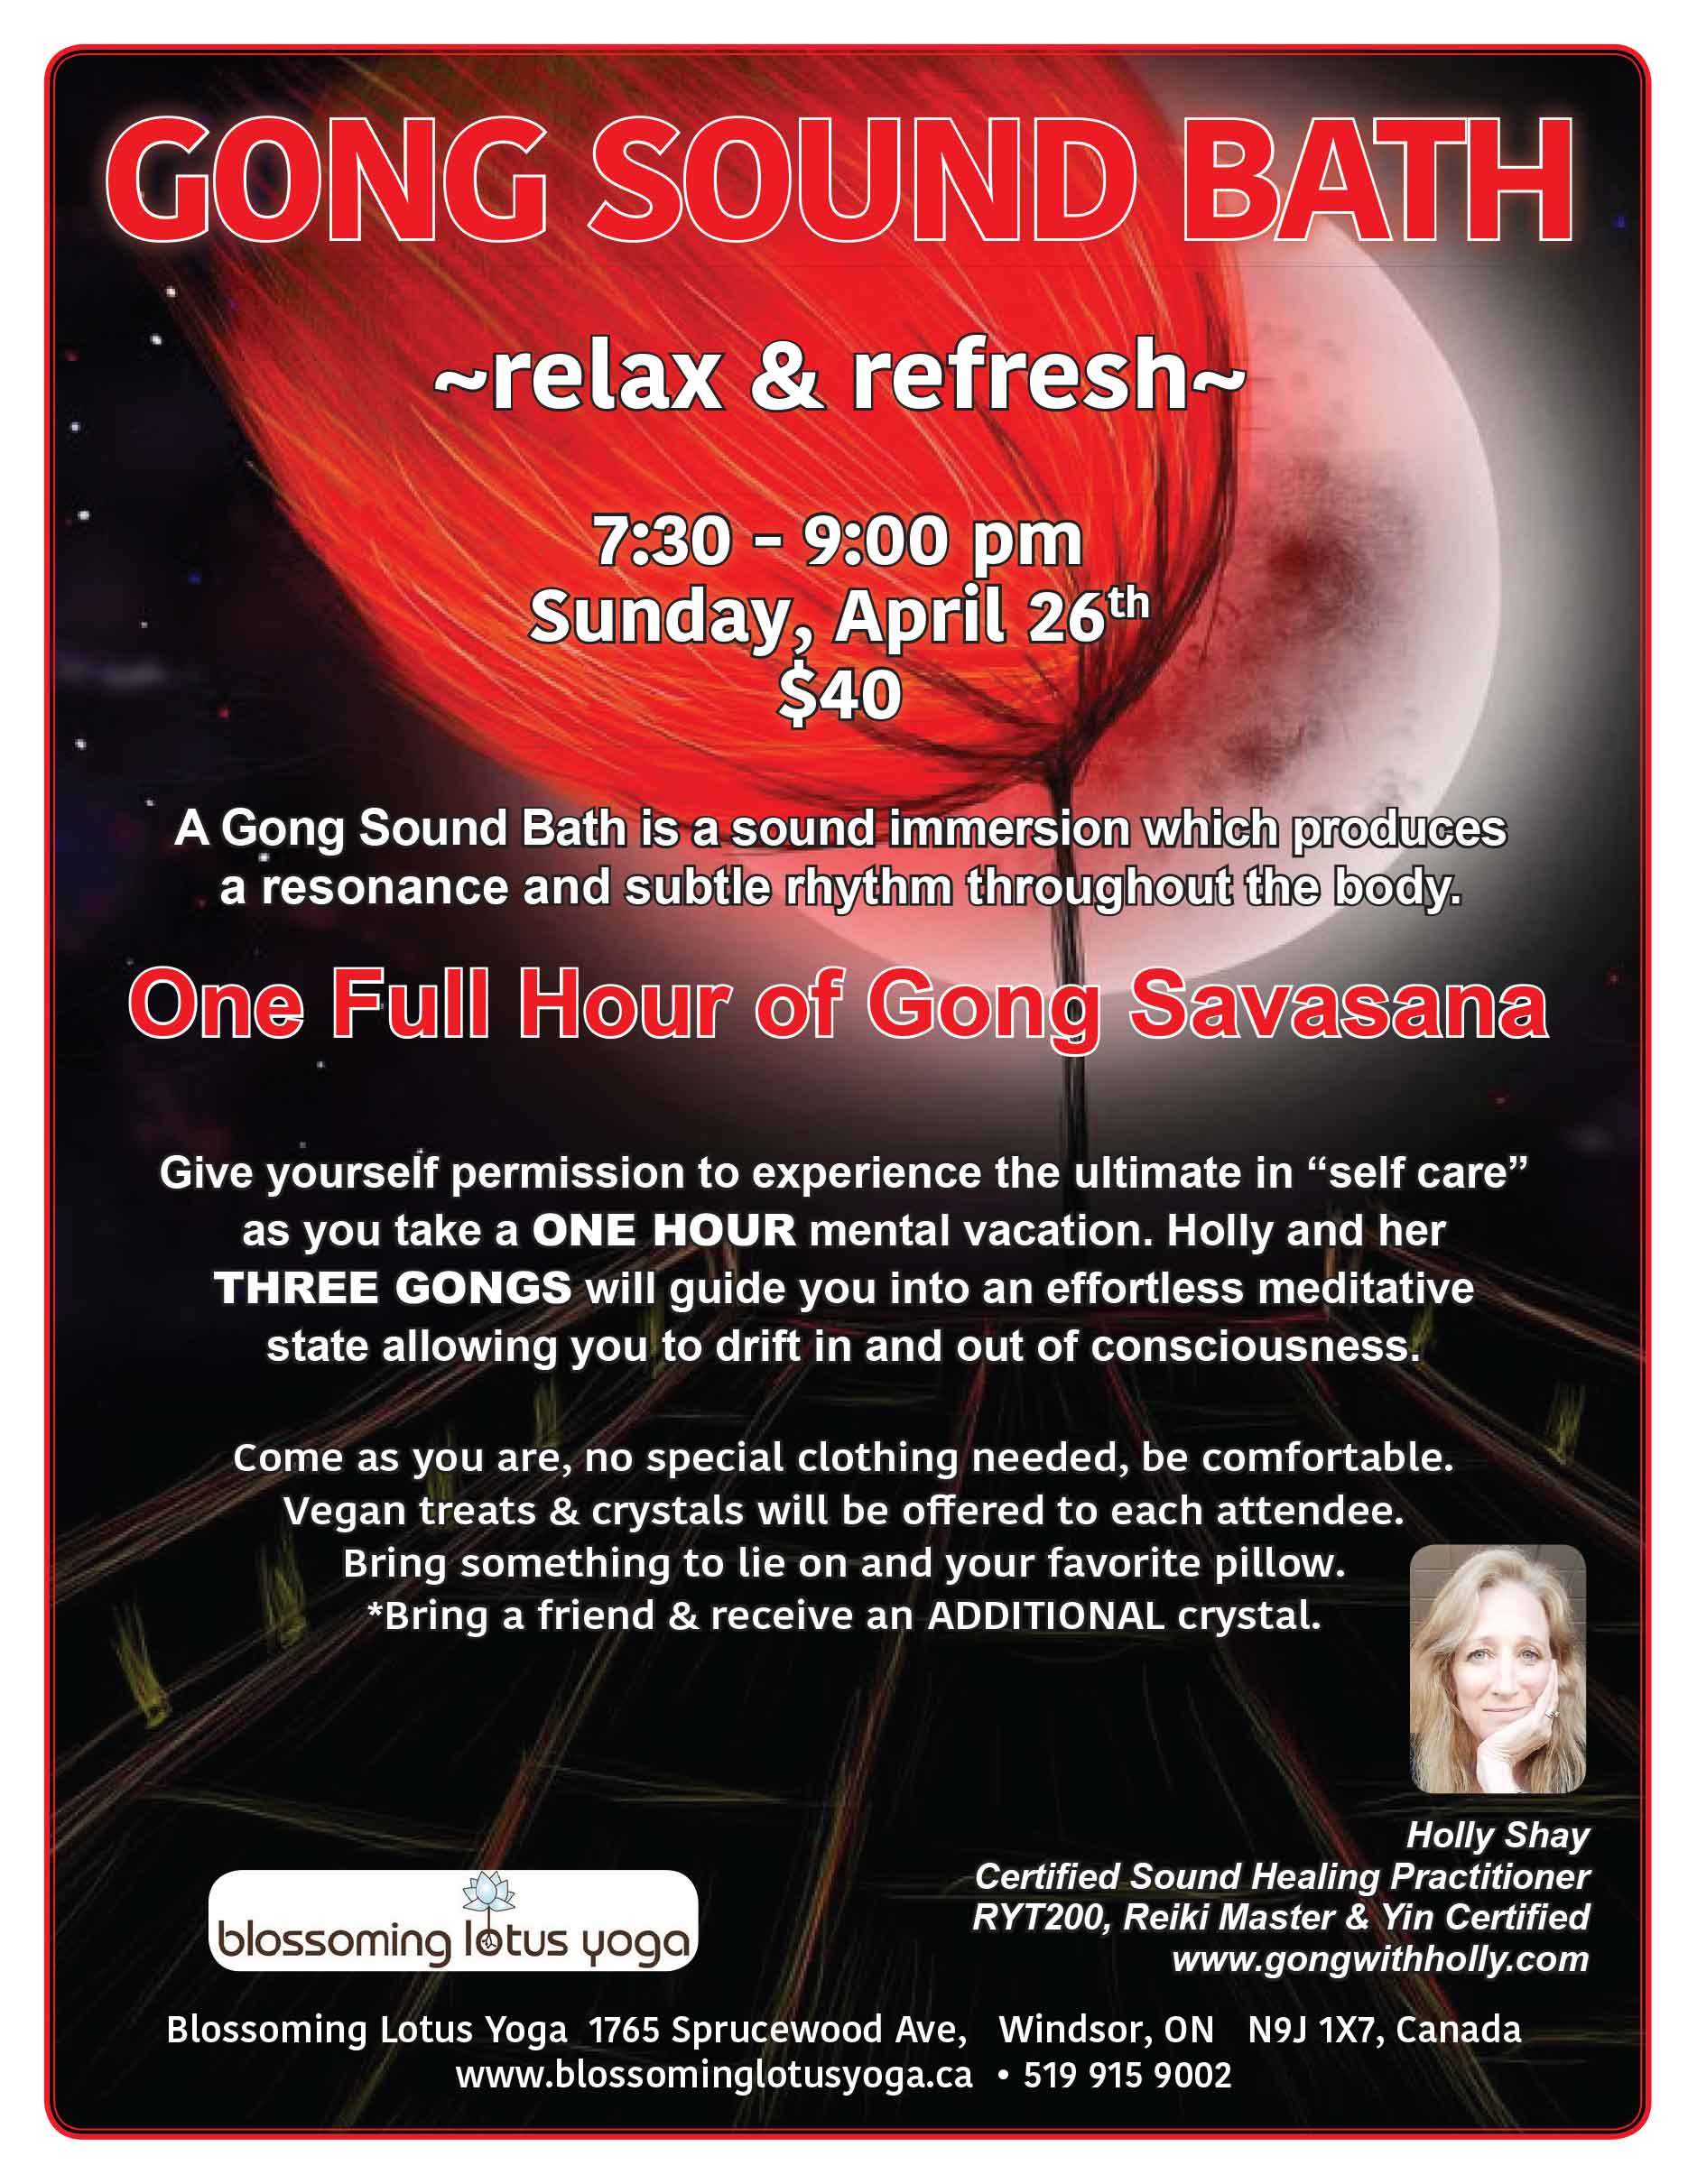 GONG SOUND BATH ~relax & refresh~ Sunday, April 26th - 7:30 - 9:00 pm - $40 - Blossoming Lotus Yoga - Windsor, ON